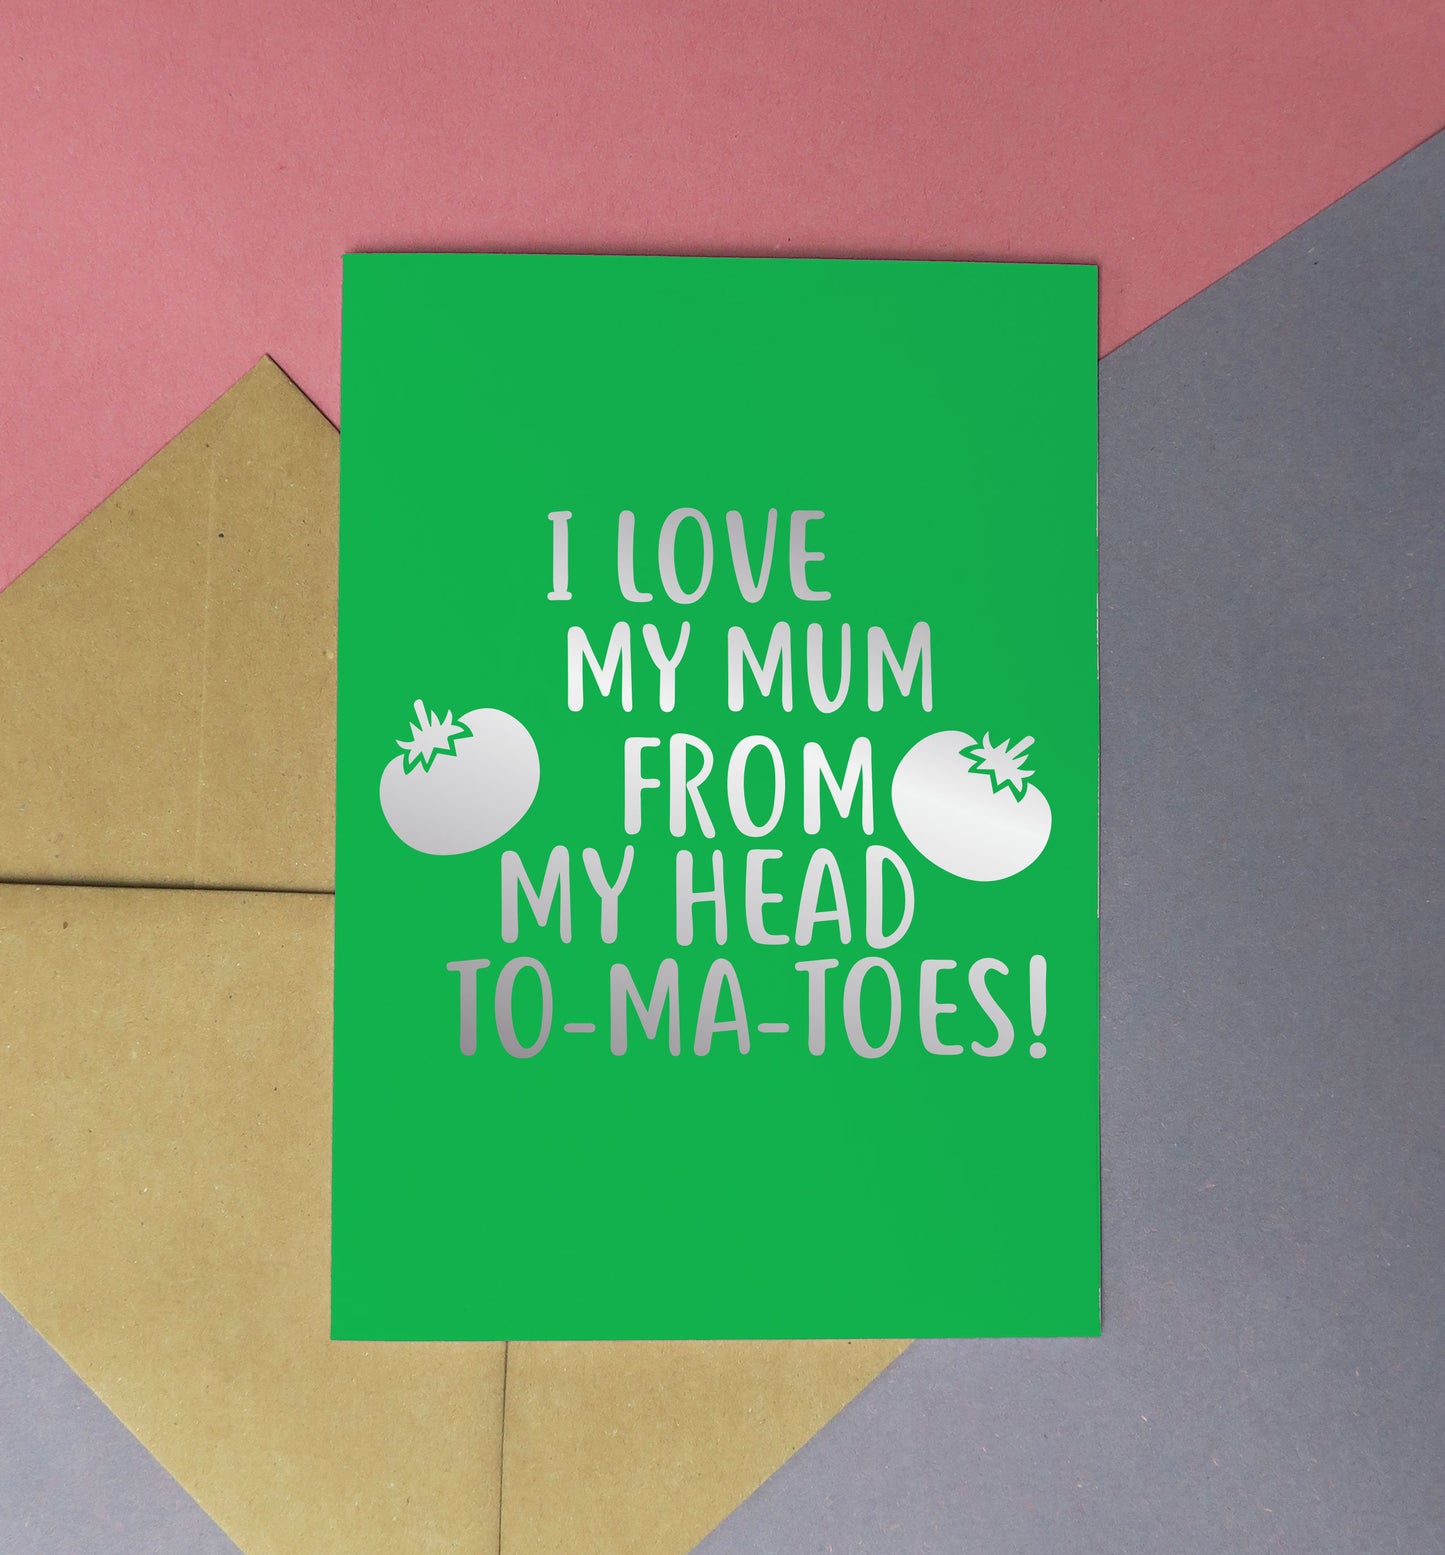 I love my mum from my head to-ma-toes greeting card green card with silver foil